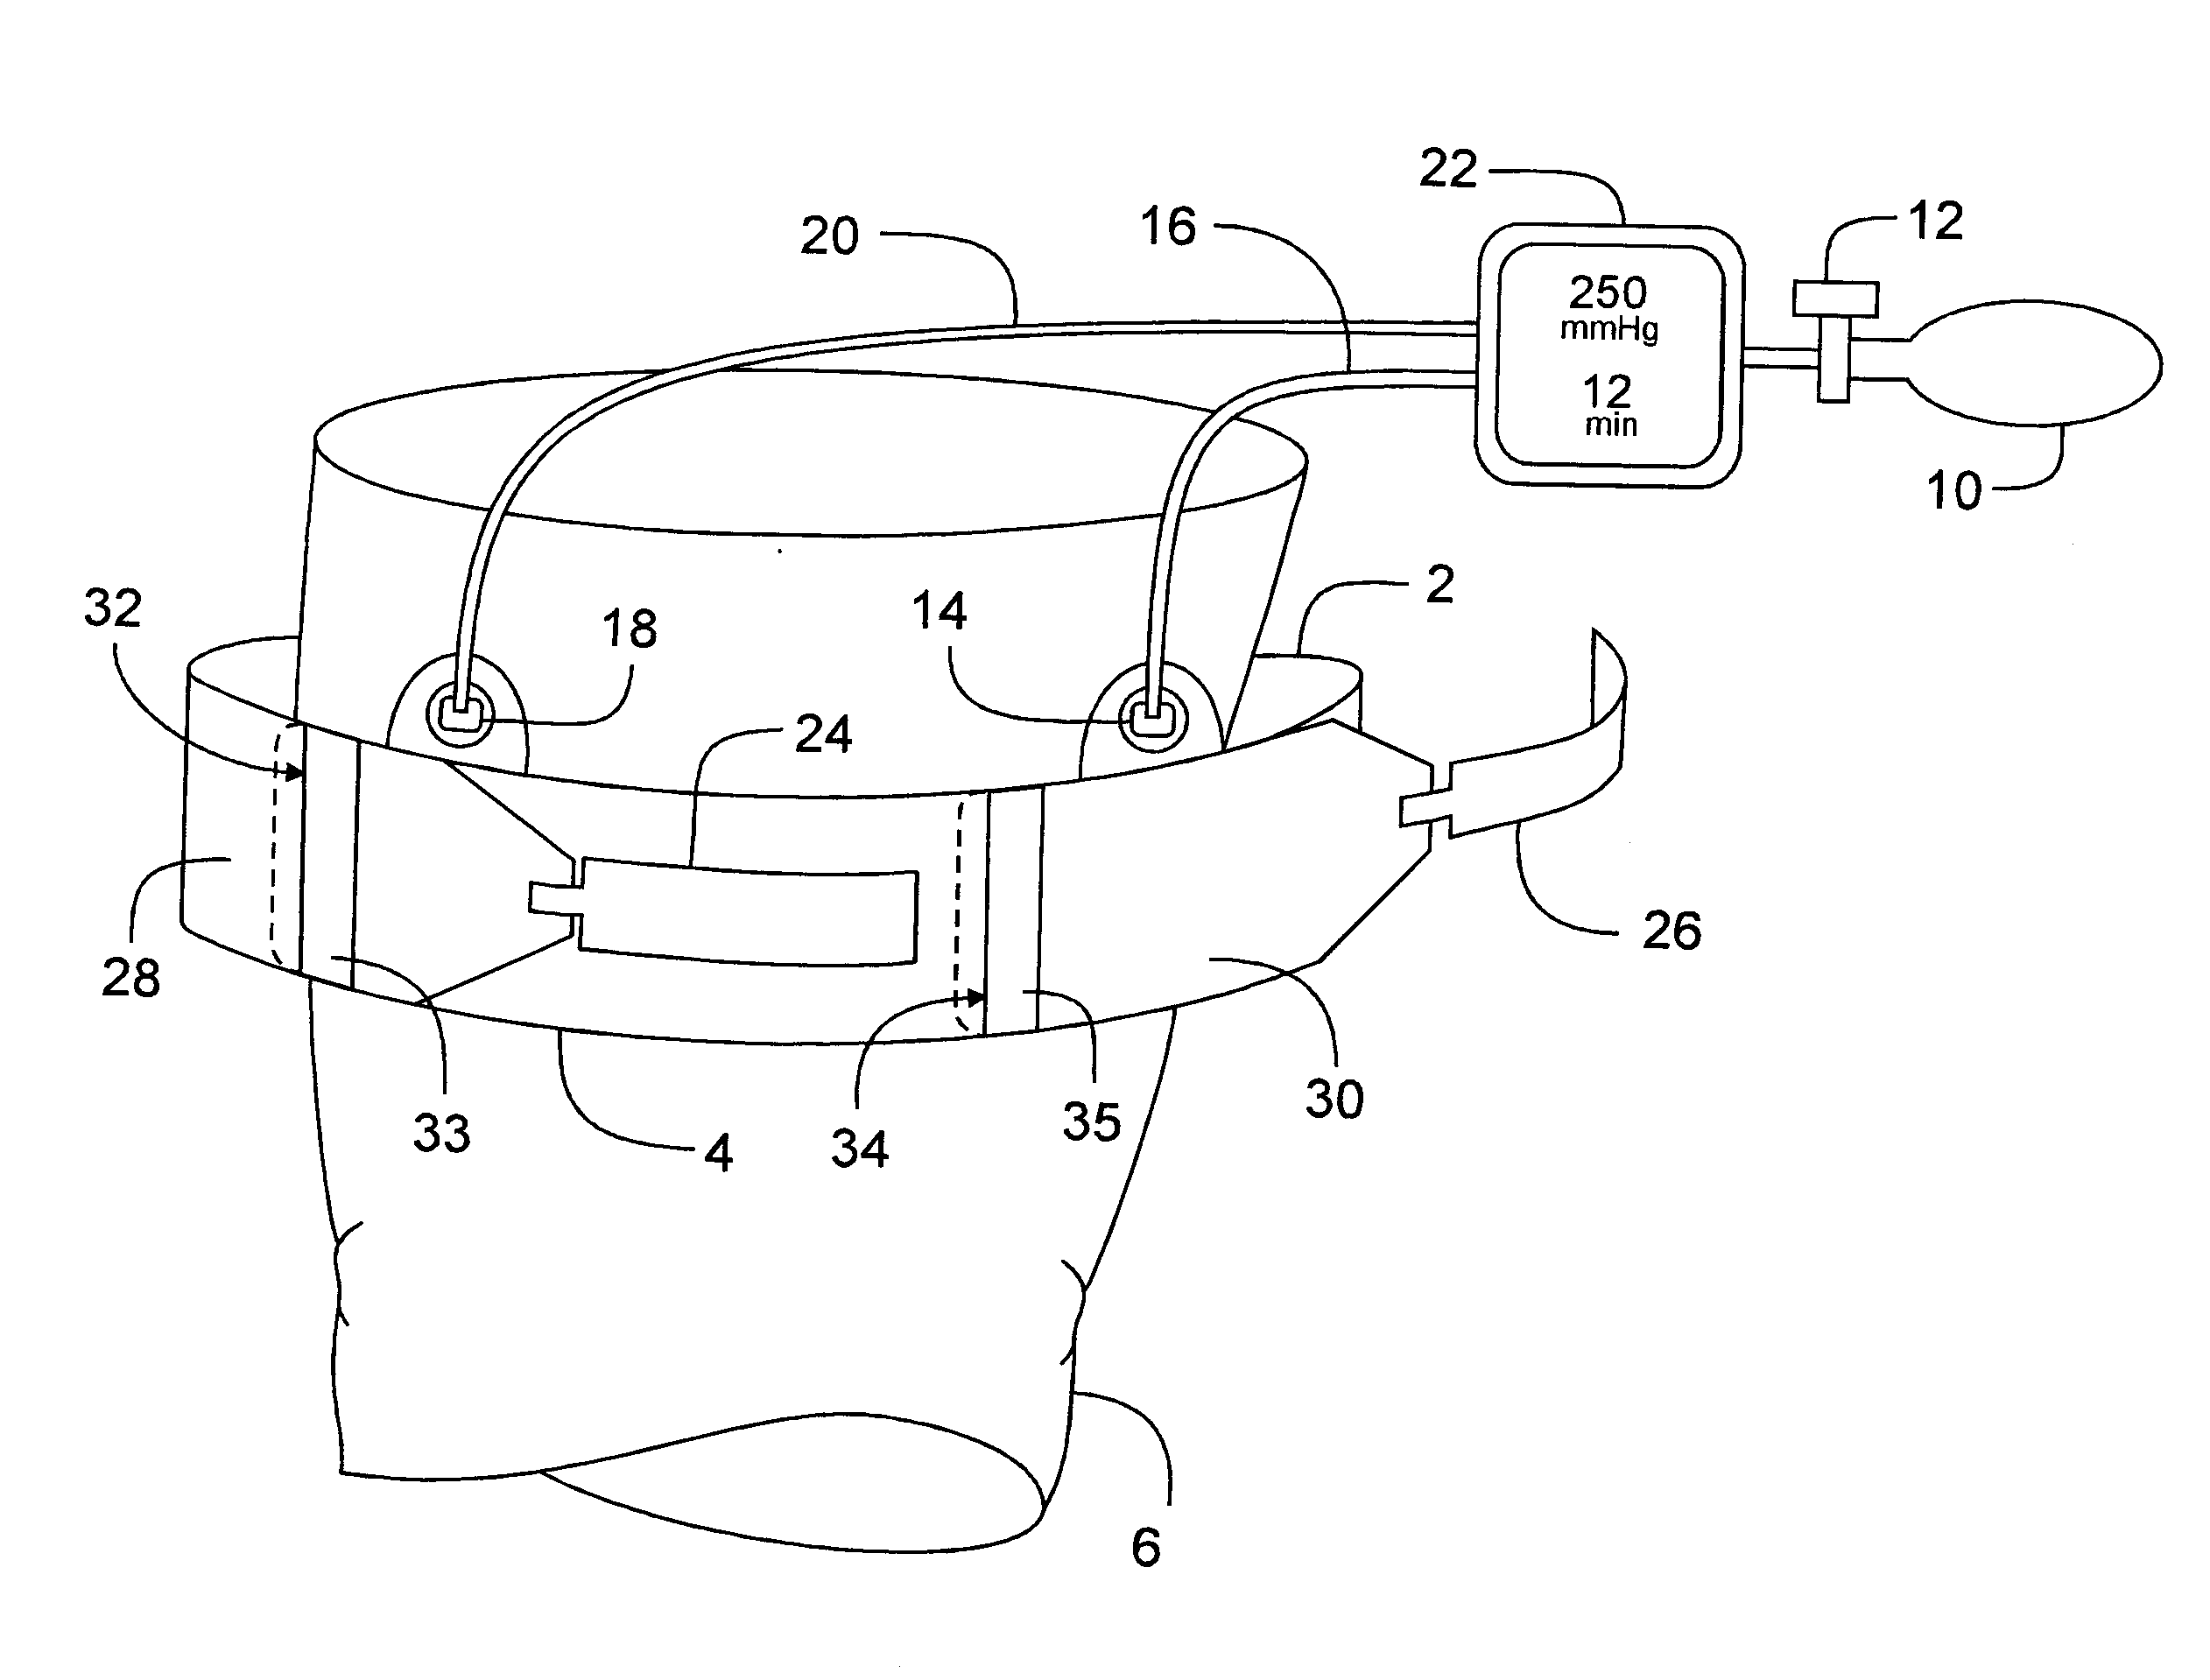 Extendible Tourniquet Cuff with Stabilizer for Improved Utility and Safety